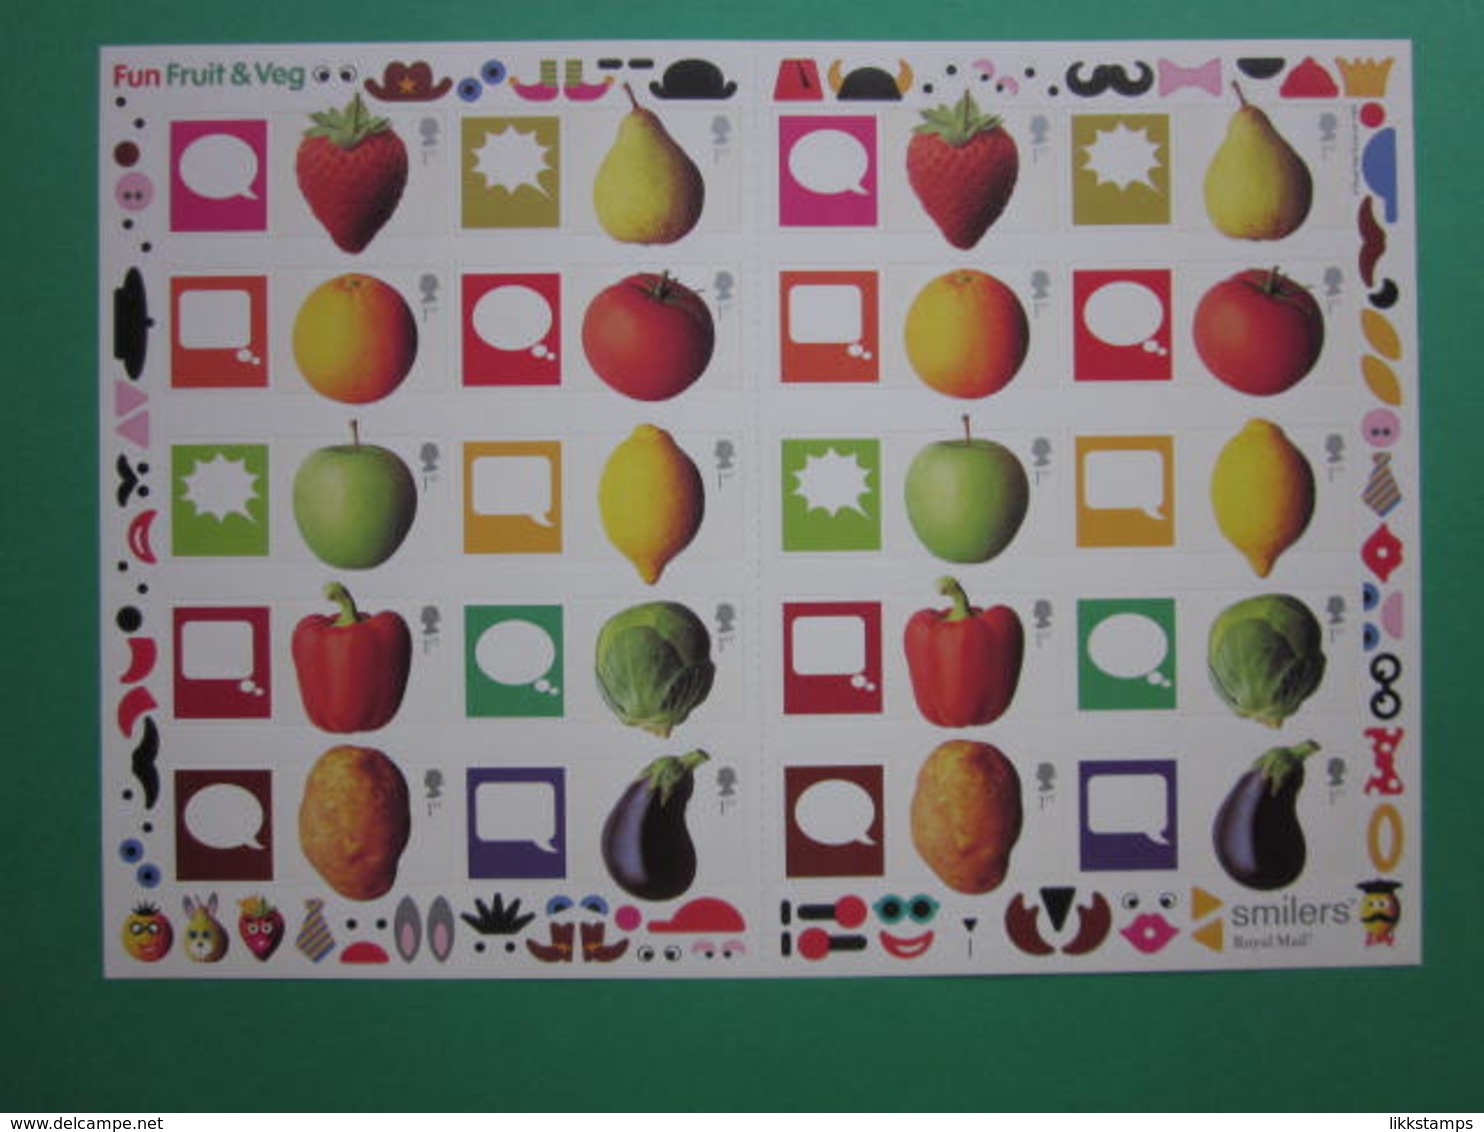 2006 ROYAL MAIL FUN FRUIT AND VEGETABLES GENERIC SMILERS SHEET. #SS0032 - Smilers Sheets